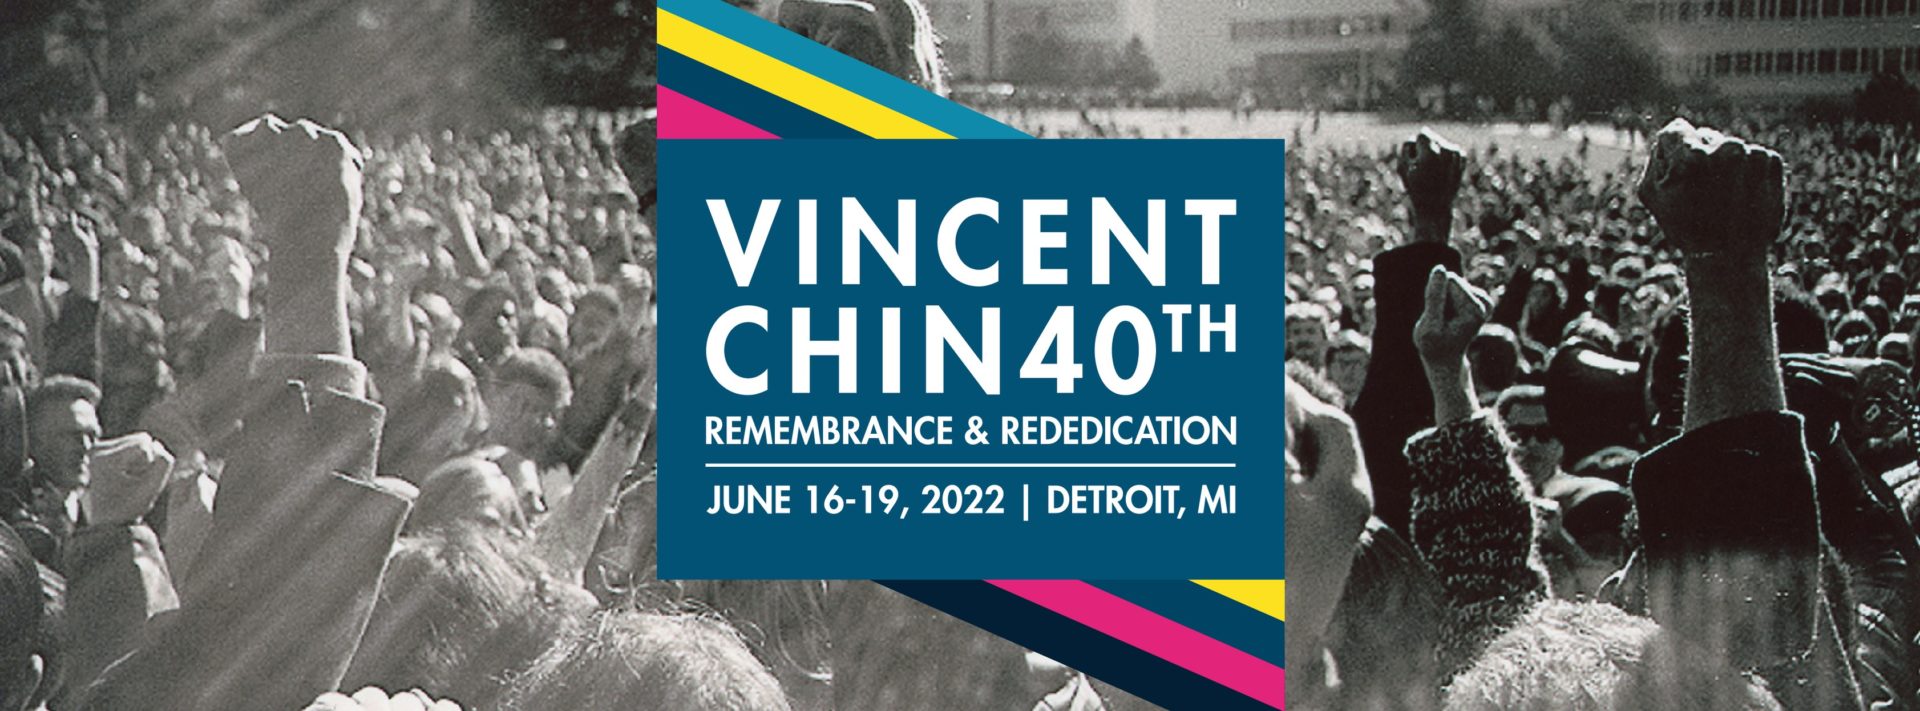 Vincent Chin 40th Remembrance and Rededication Events